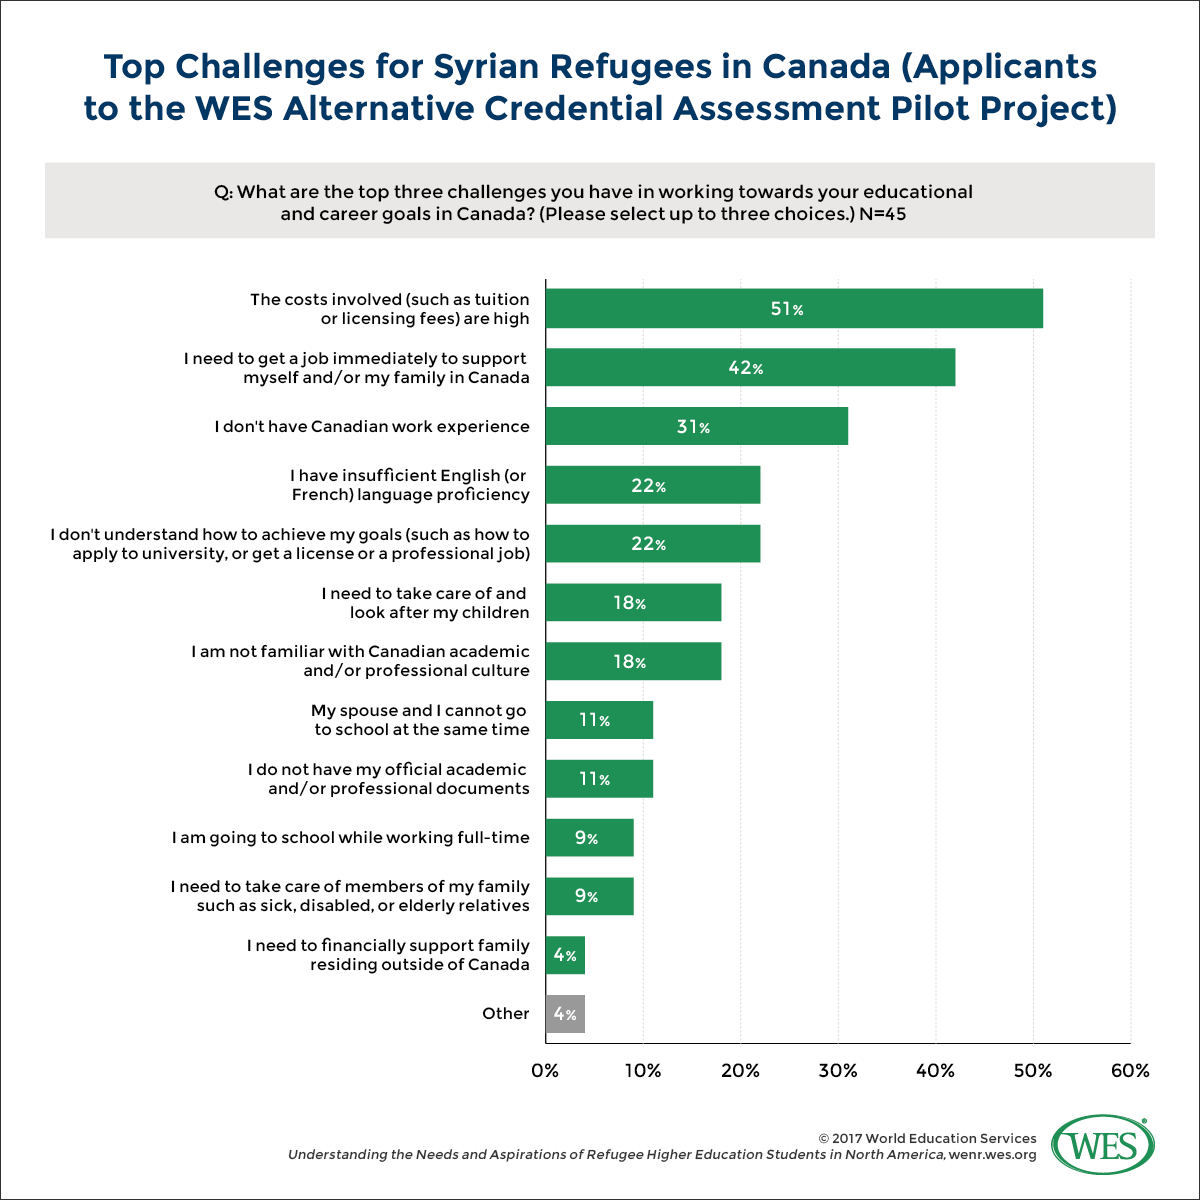 A chart showing the top challenges for Syrian refugees in Canada that were applicants to the WES alternative credential assessment pilot project. 